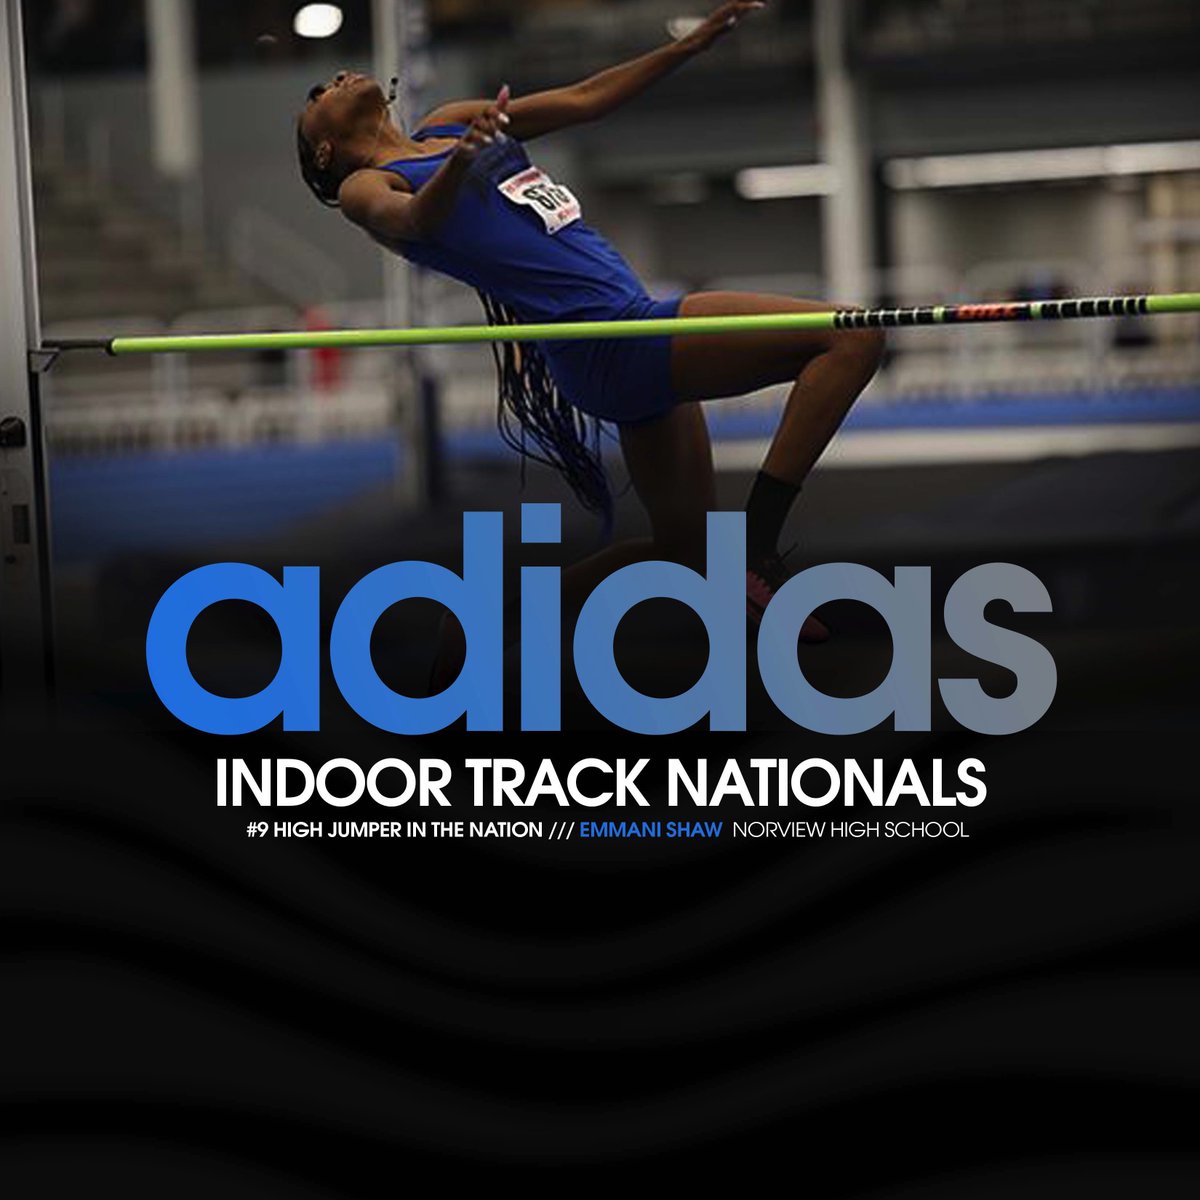 Nationals is just about here!! and guess who's already signed up?! @Trippydre1 & @Emmani63901011 Register Today!!! #AdidasTrackNationals #Milesplit #TrackNation #VirginiaBeach